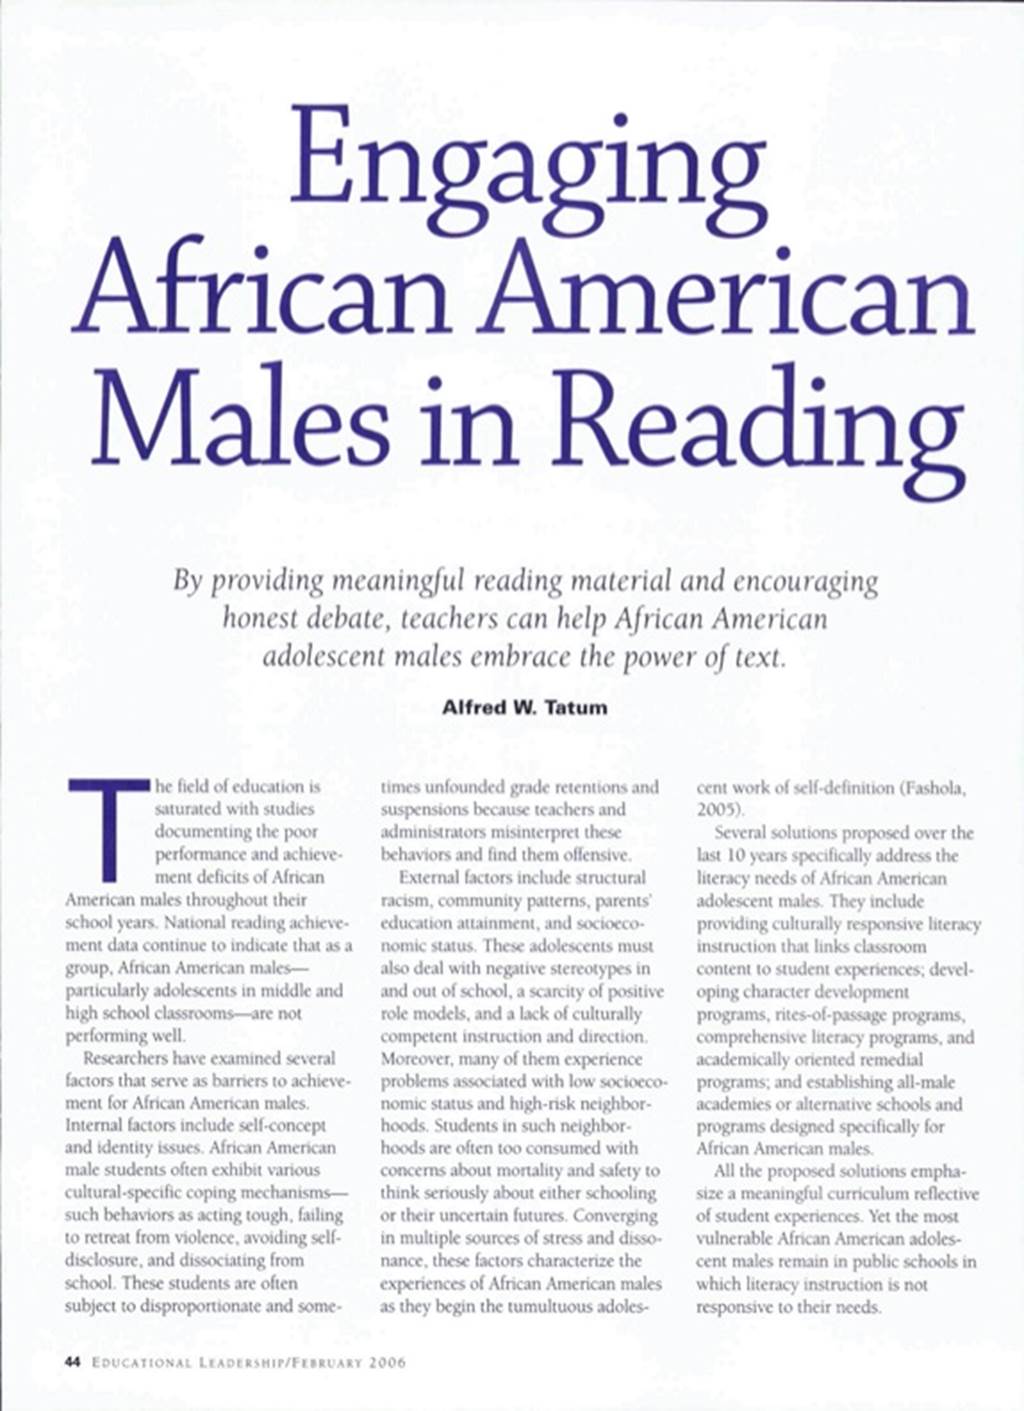 Engaging African American Males in Reading Image